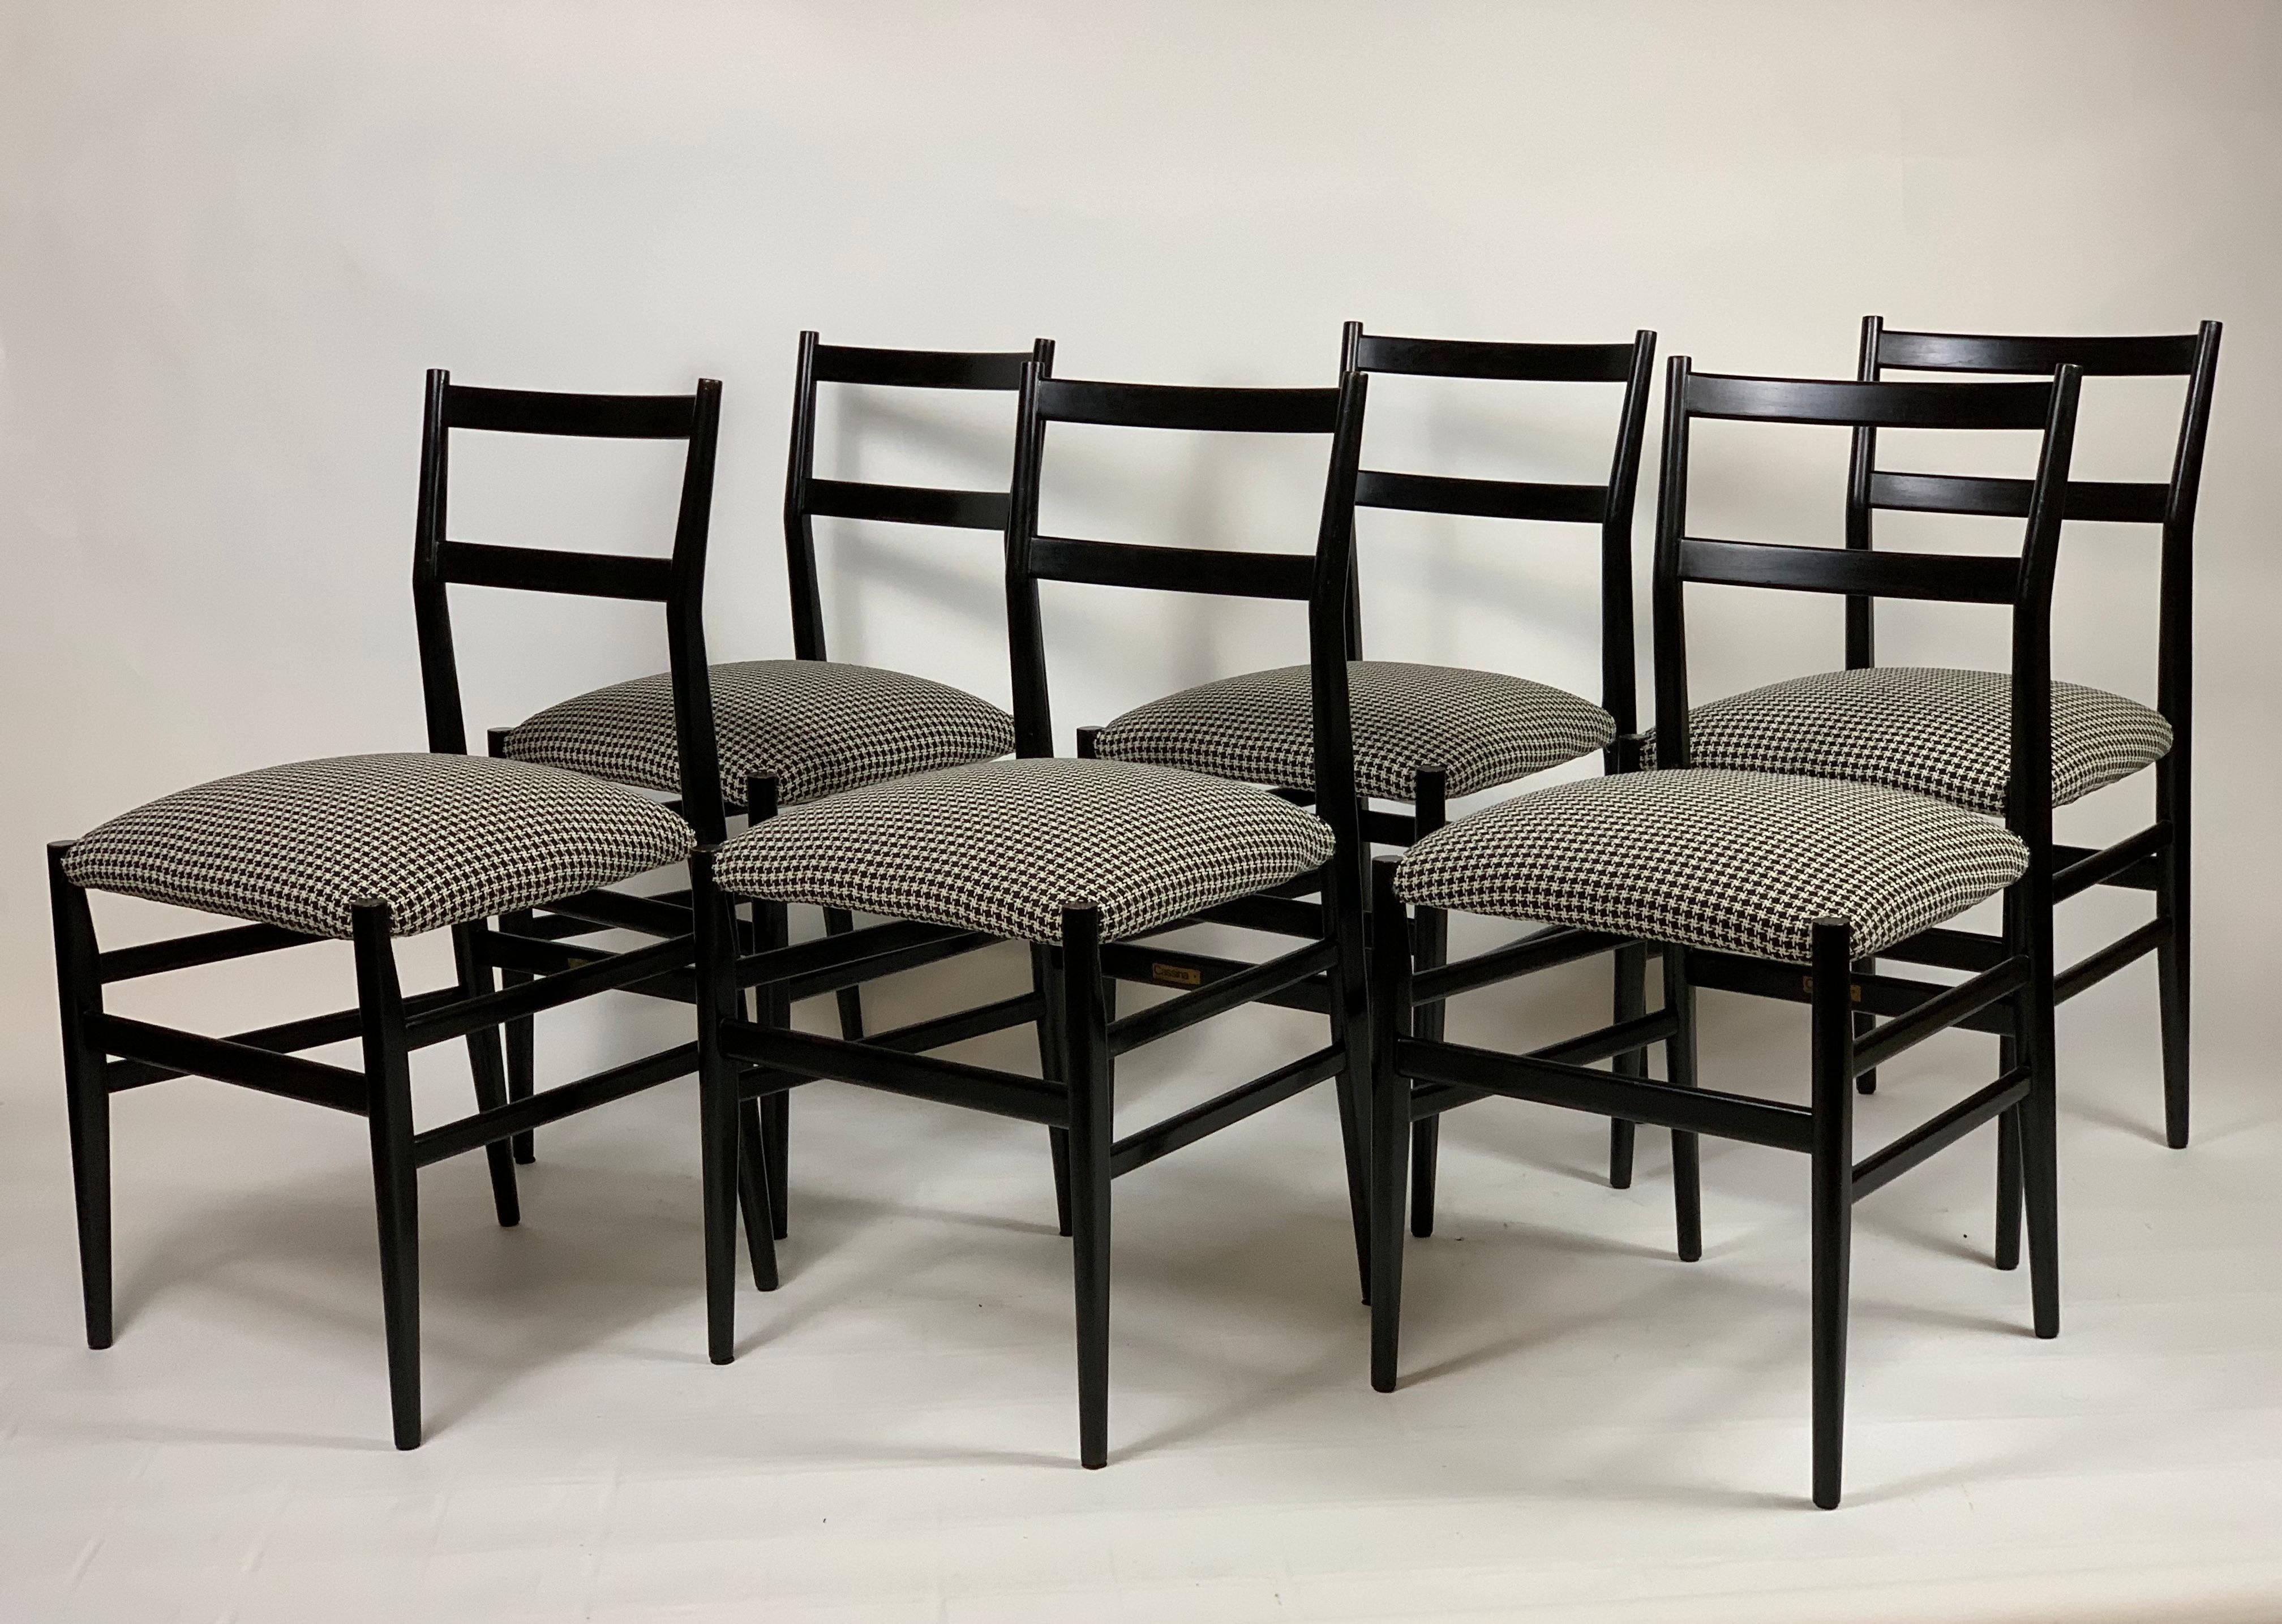 Six iconic Leggera chairs, black lacquered solid ash tree, designed by Architect Gio Ponti in the 1951, produced by Cassina, all the chairs are signed.
Newly covered with a cotton pied de poule black and white fabric.
Some little trace of use in